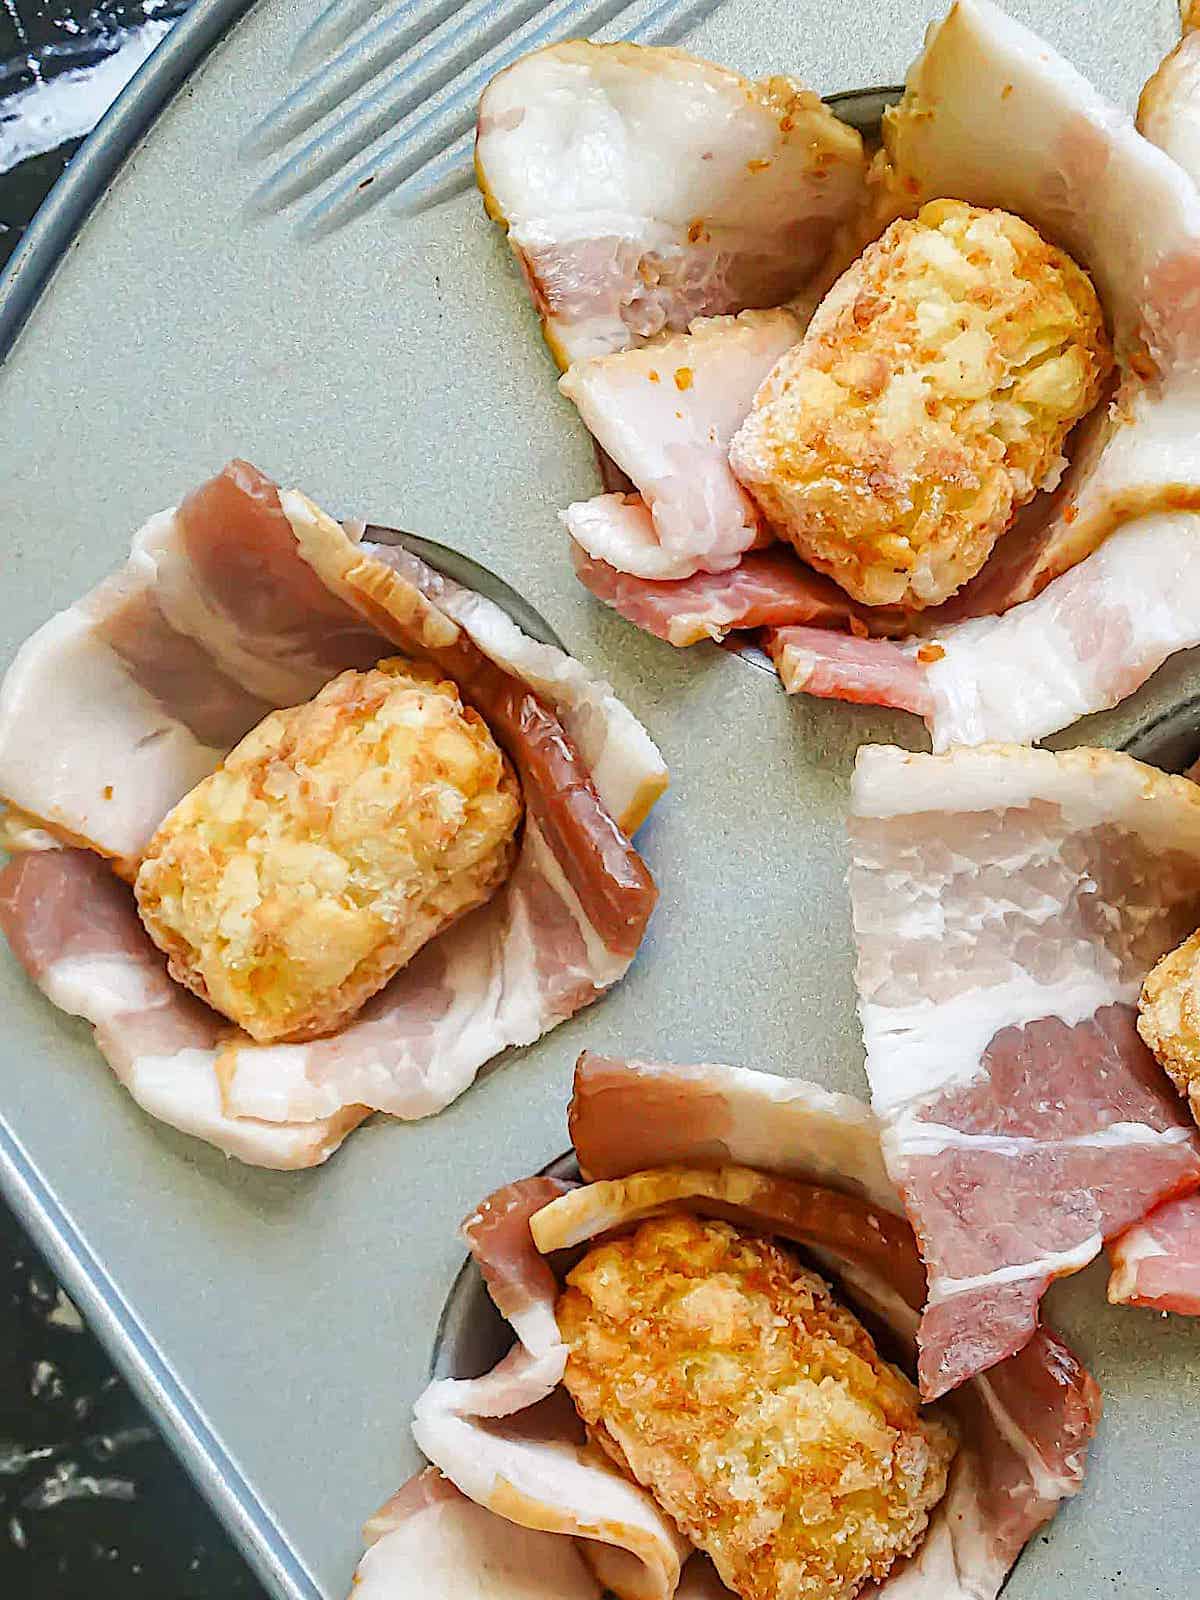 tater tots stuffed onto bacon slices in a muffin tin